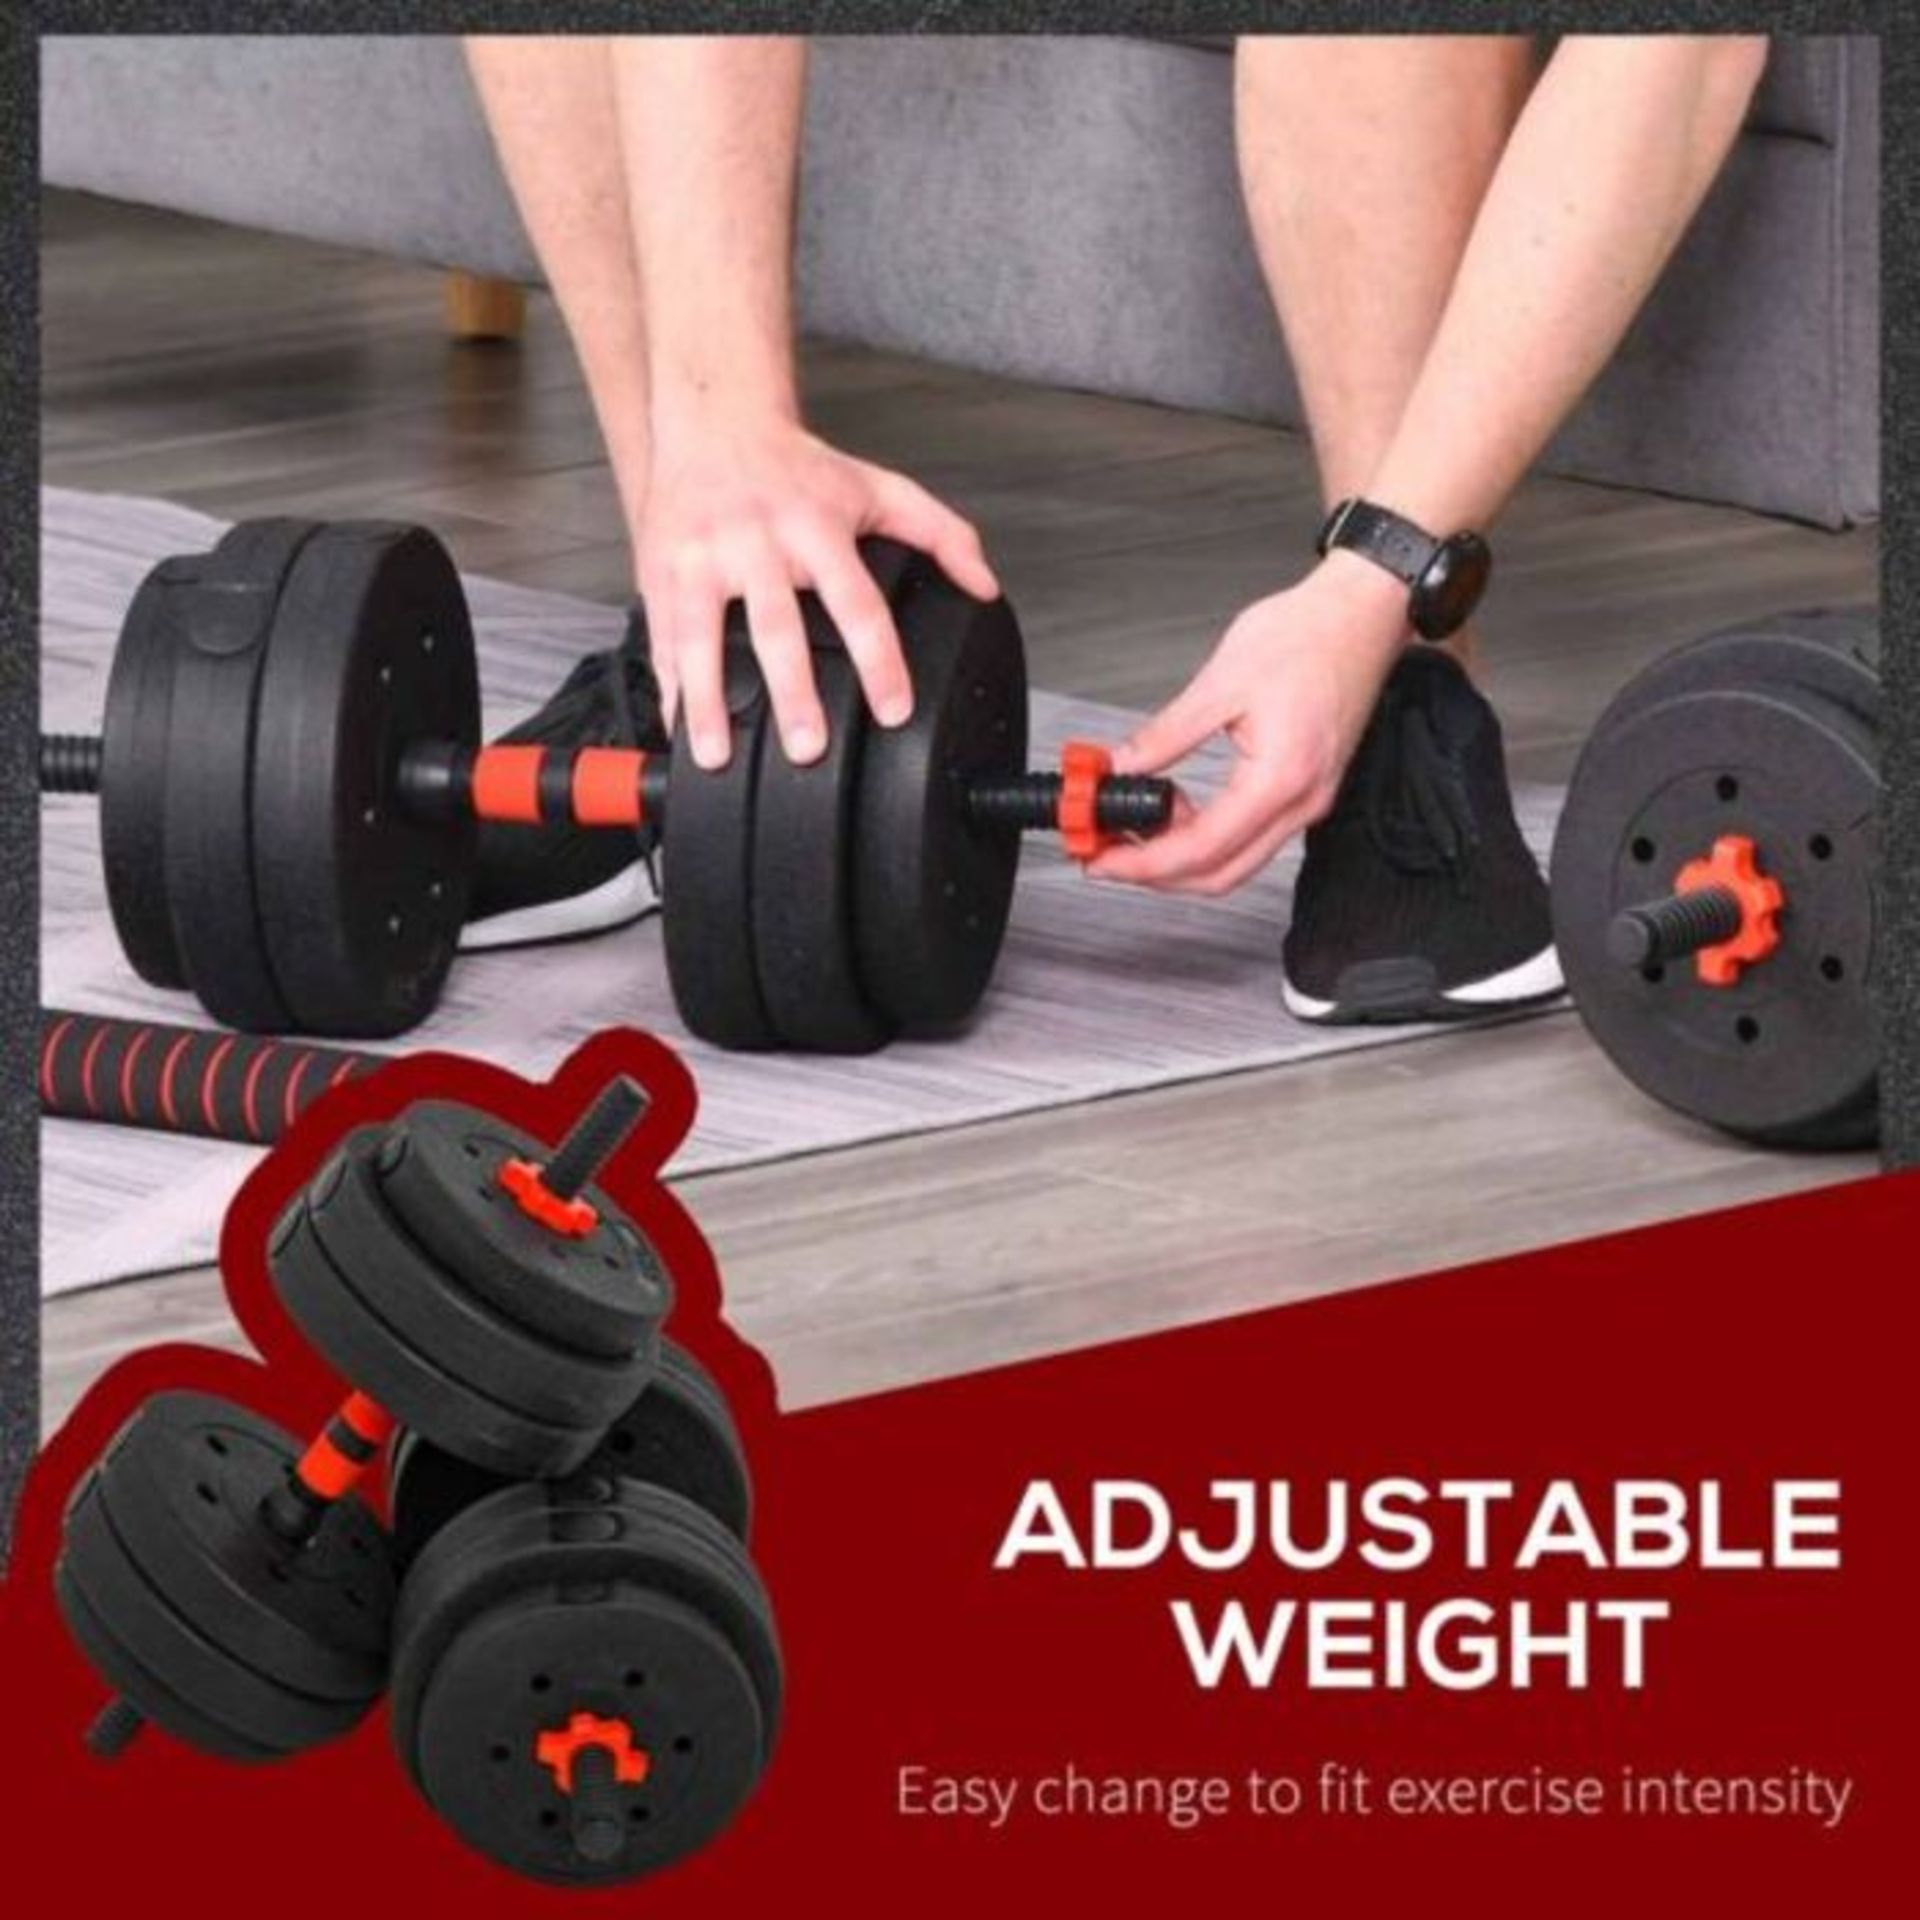 Hom Com 2 in1 Barbell/Dumb bell 20kg weight set, new and boxed, Similar sets retail at around ?40 - Image 2 of 4